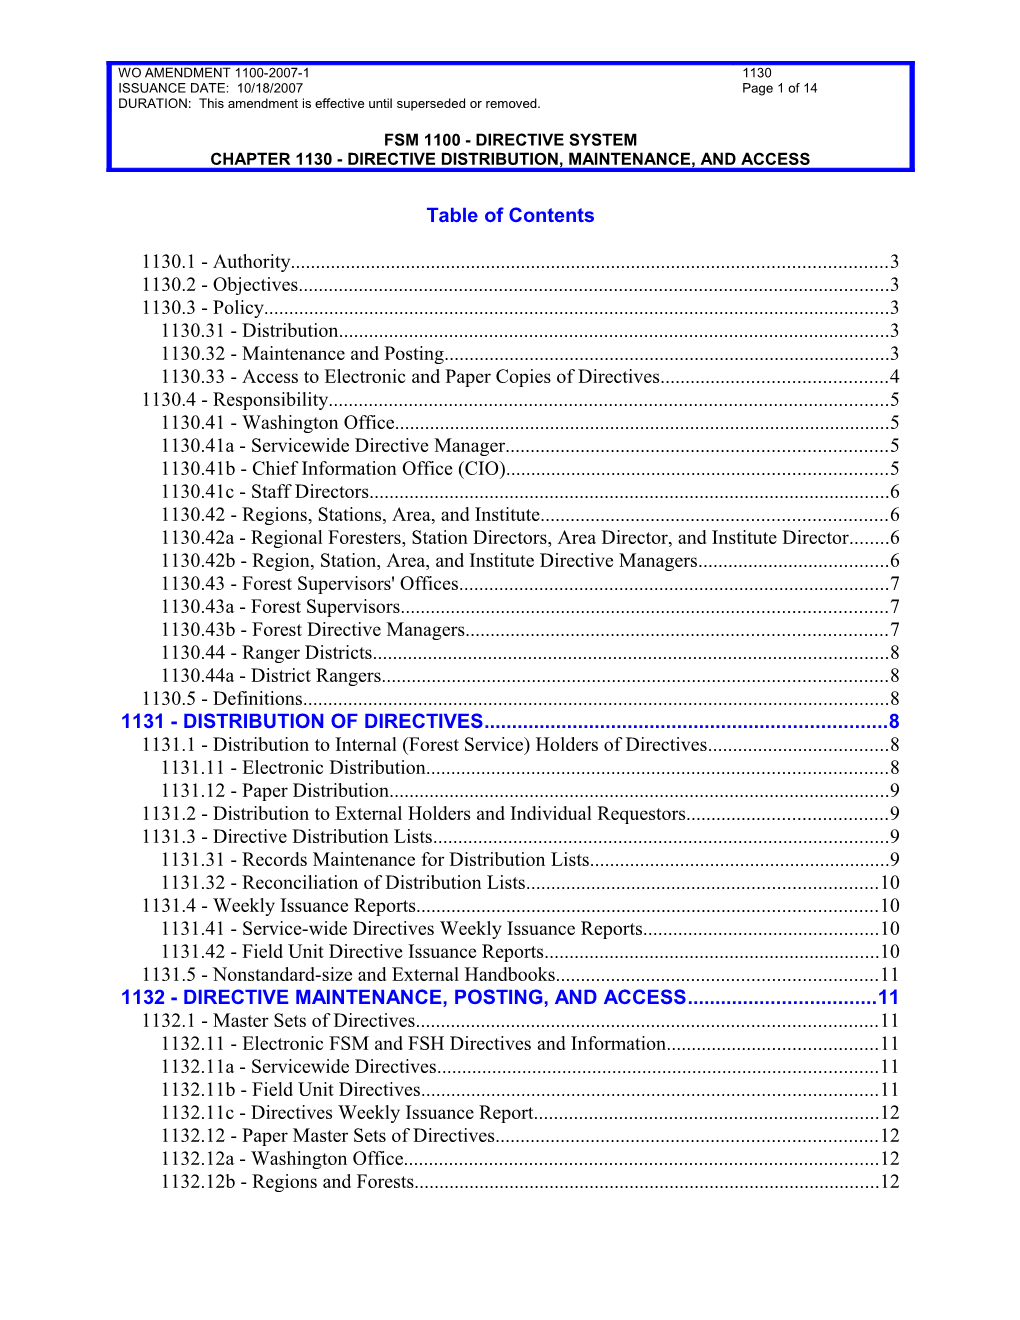 Table of Contents s390